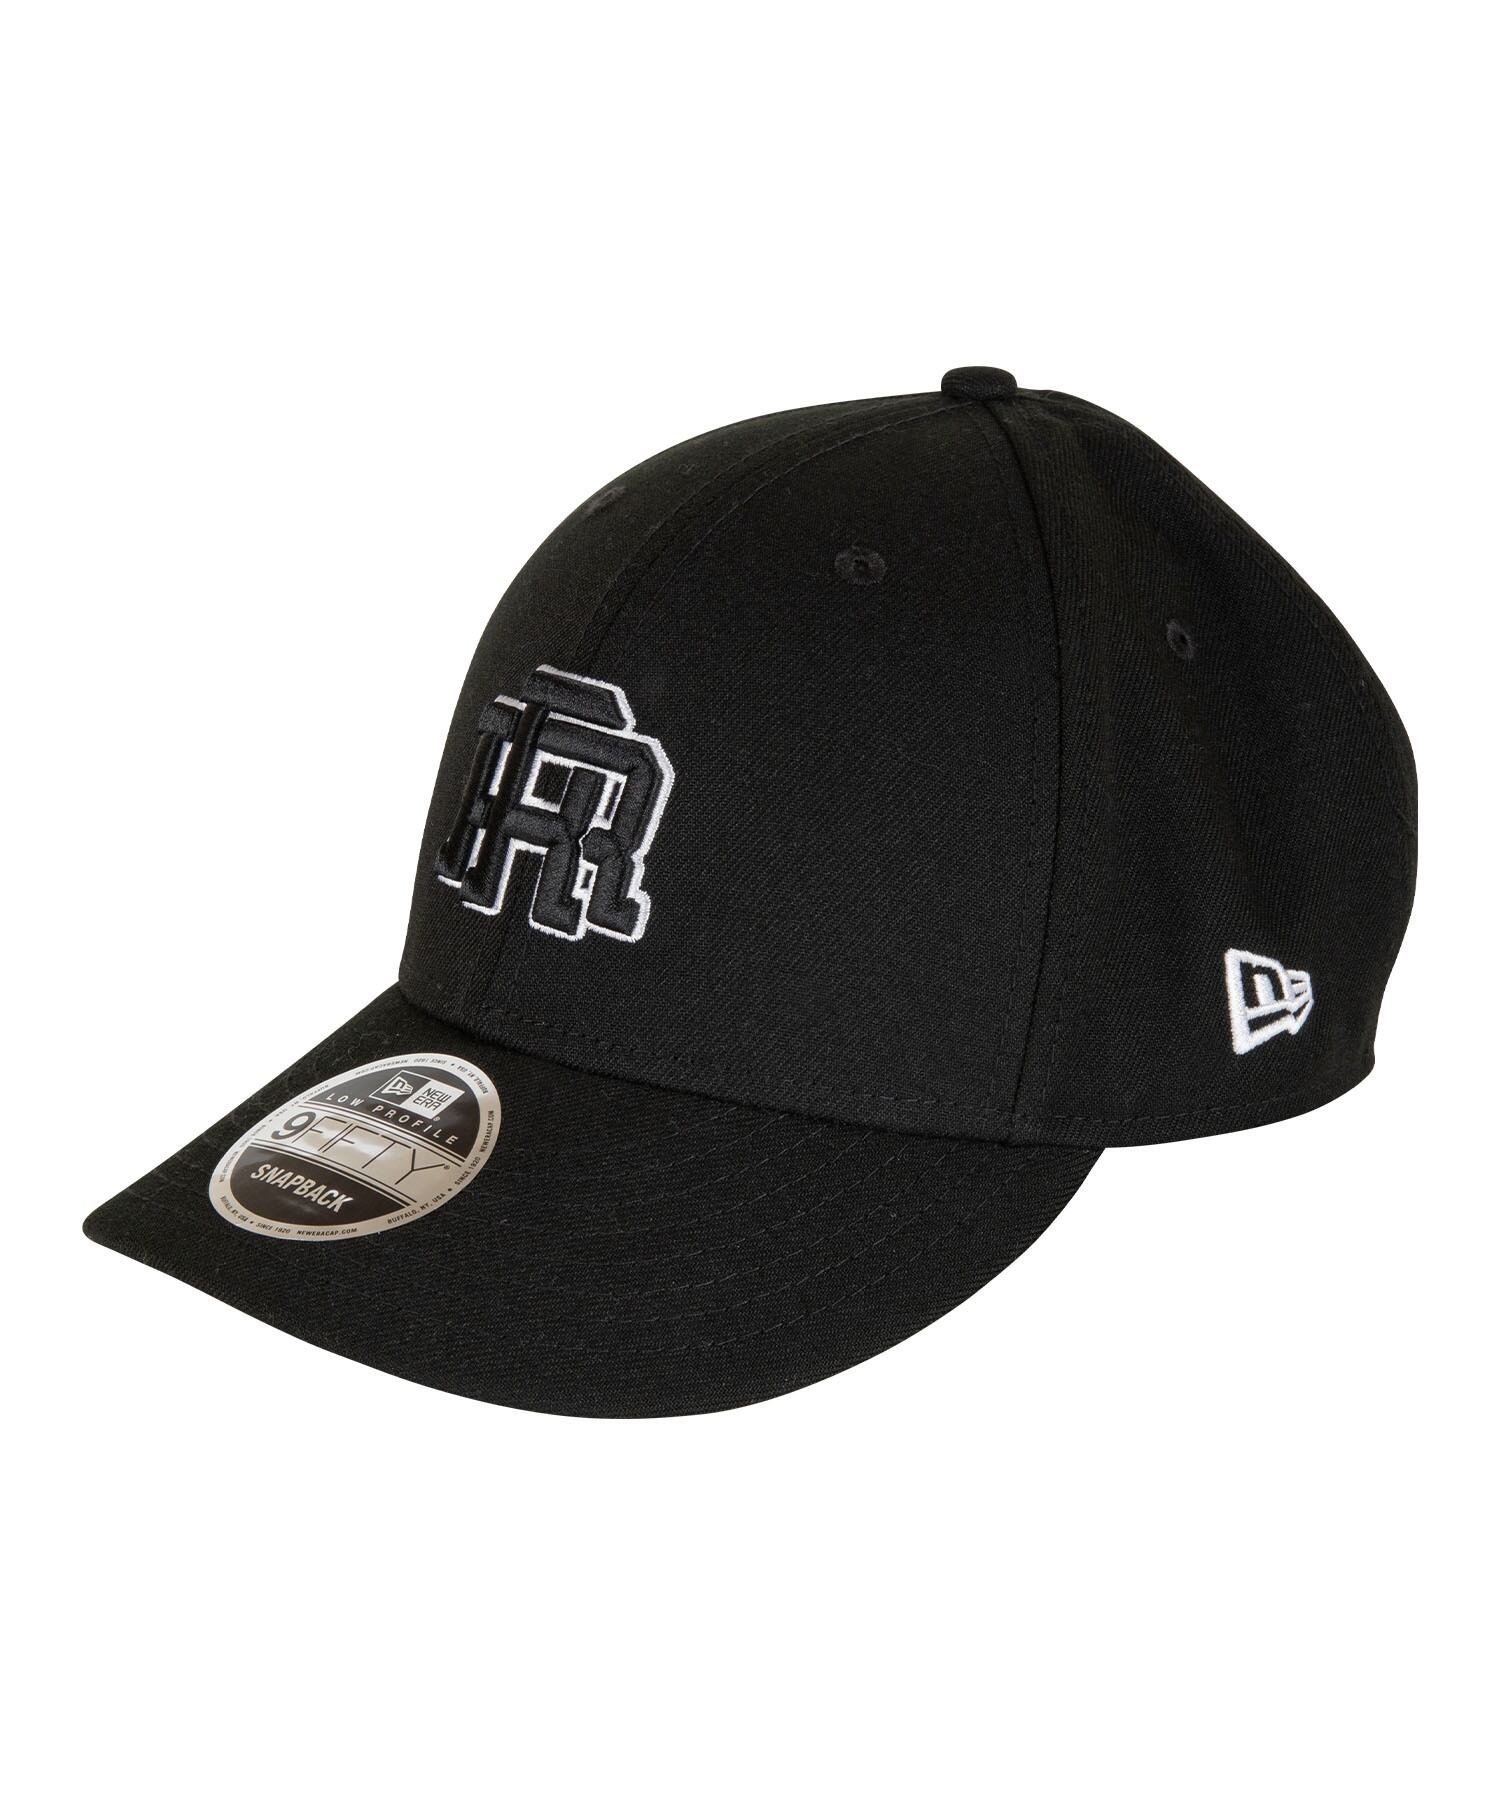 【#Re:room×NEW ERA】 9FIFTY LOW PROFILE［REH150］